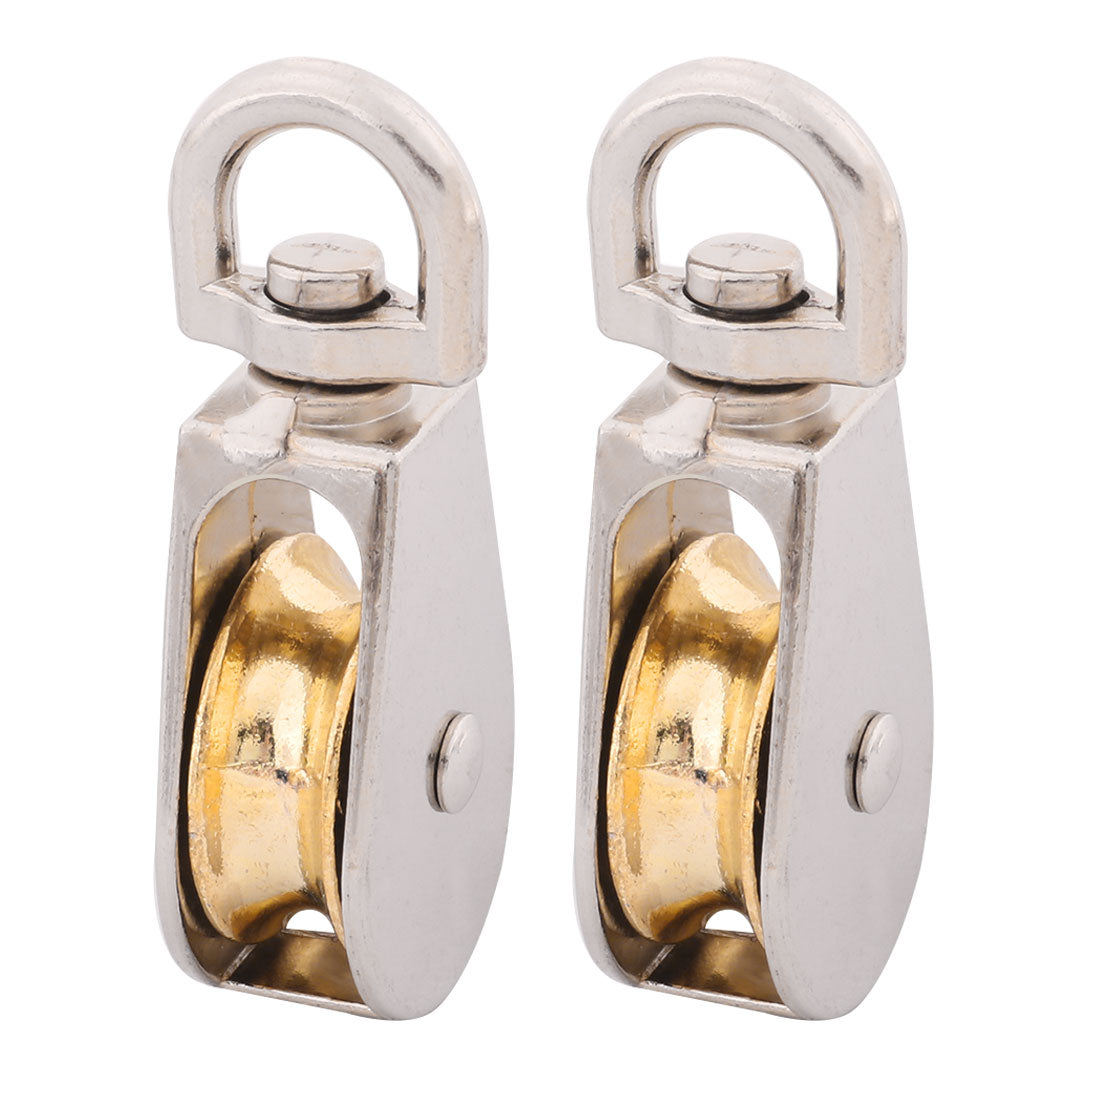 uxcell Uxcell Home Zinc Alloy Hardware Single Rope Pulley Block Silver Tone 25mm Dia 2 Pcs